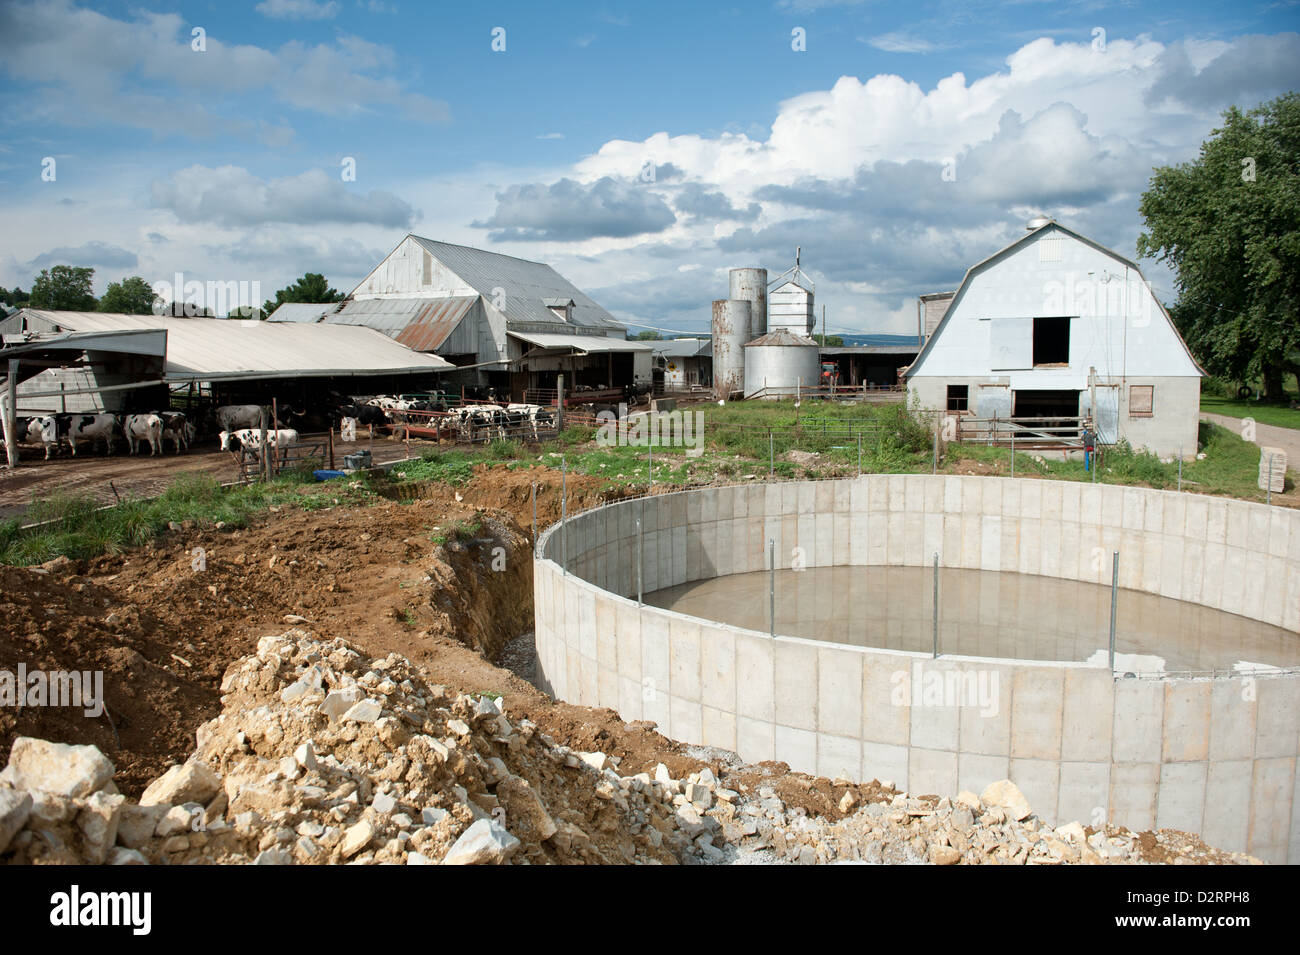 Dairy cows in barn and waste treatment structure on a farm Stock Photo